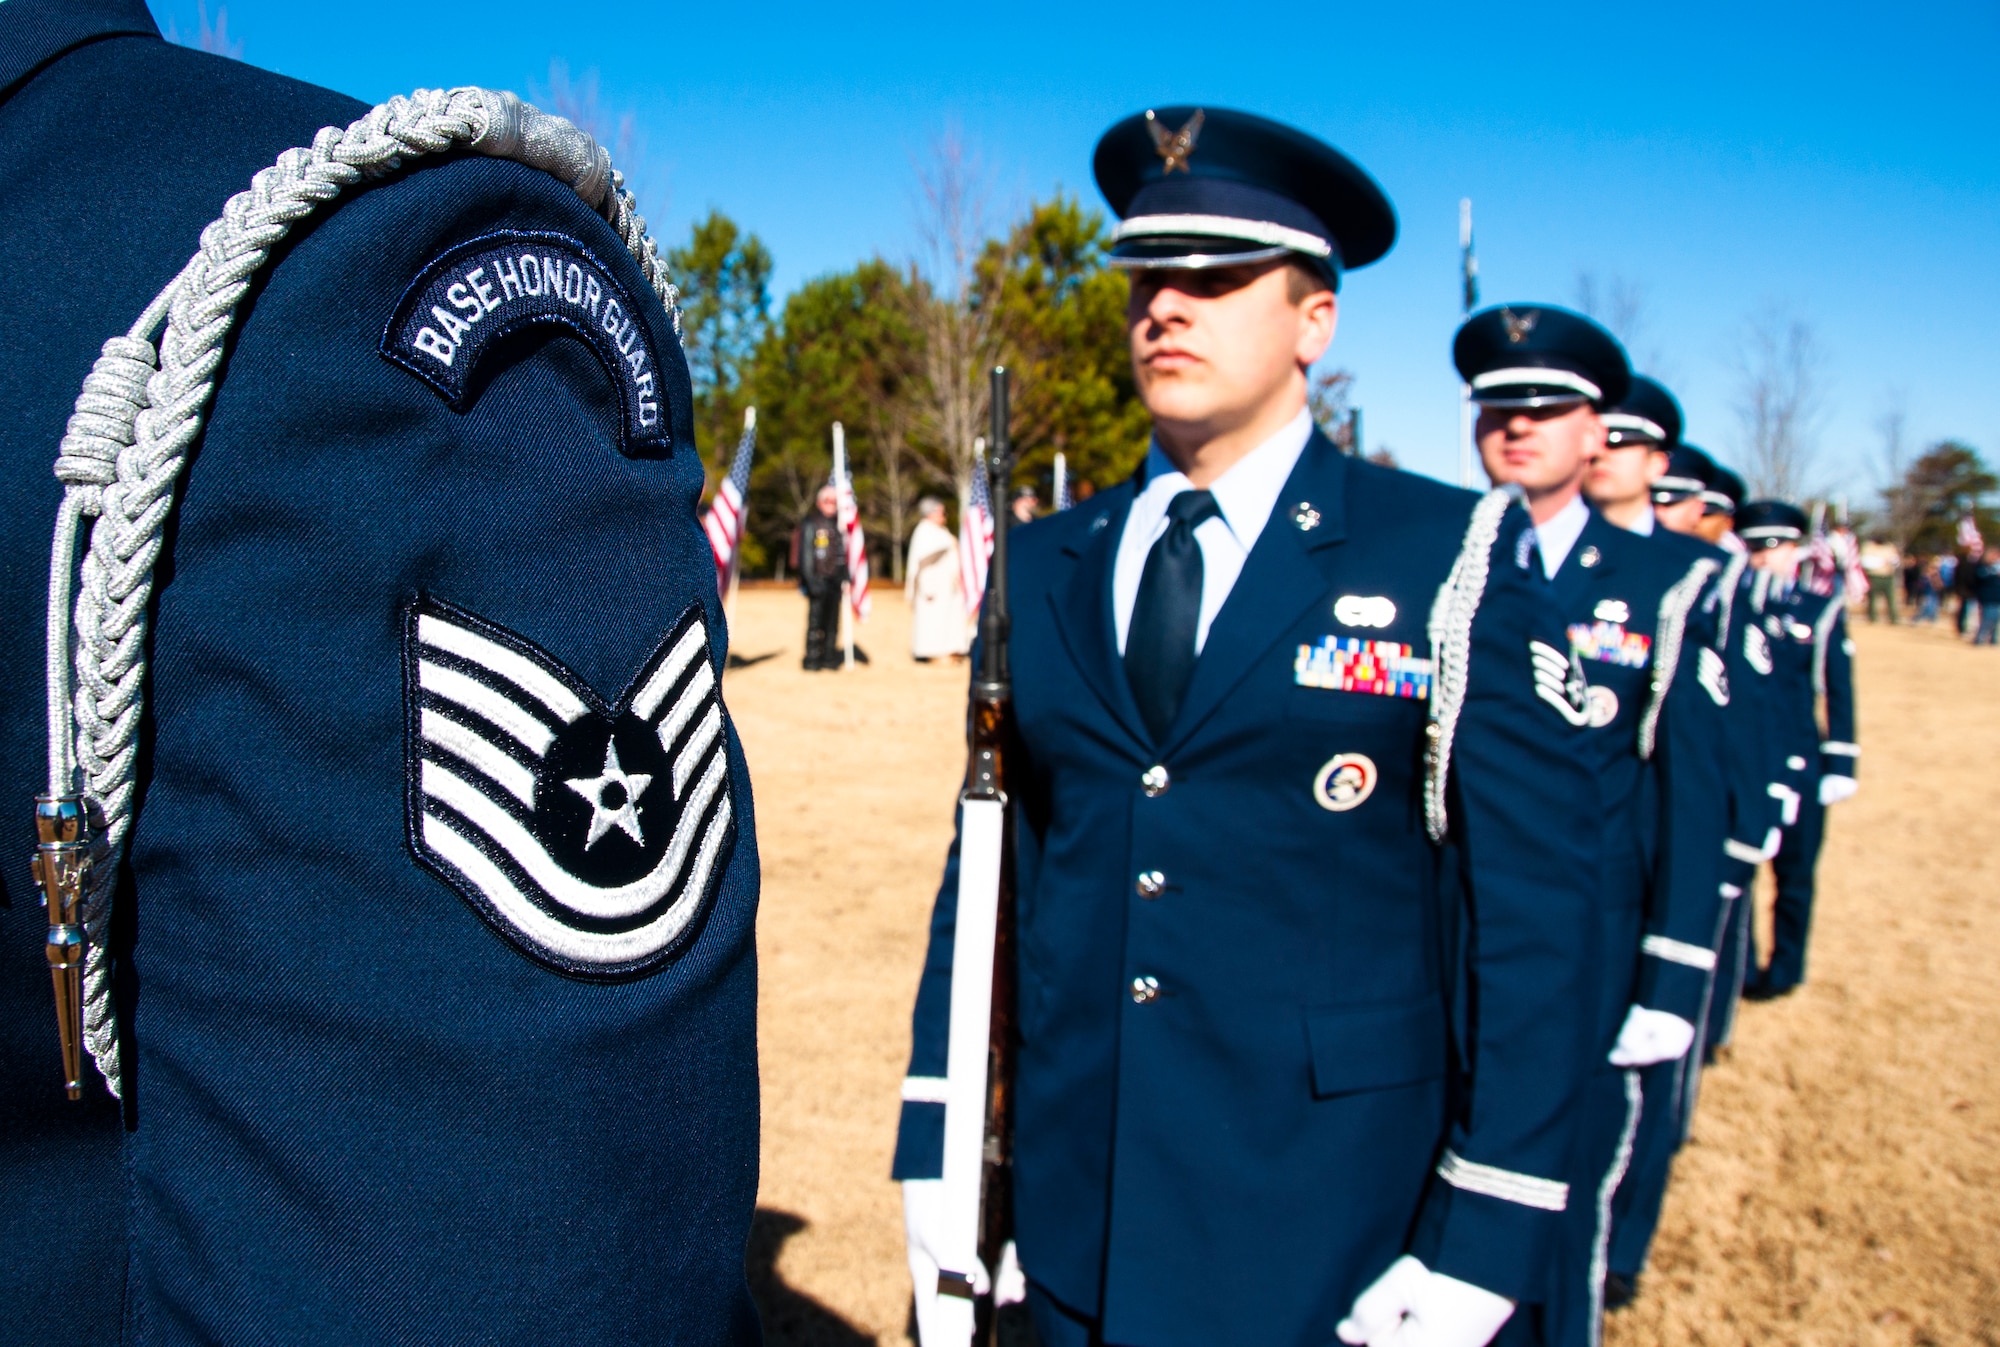 Honor Guard members from Dobbins Air Reserve Base, Ga. march in formation for Wreaths Across America ceremony at Georgia National Cemetery in Canton, Ga. Dec. 13, 2014. The vision of the U.S. Air Force Honor Guard is to ensure a legacy of Airmen who promote the mission, protect the standards, perfect the image and preserve the heritage of the organization. (U.S. Air Force photo/Senior Airman Daniel Phelps)